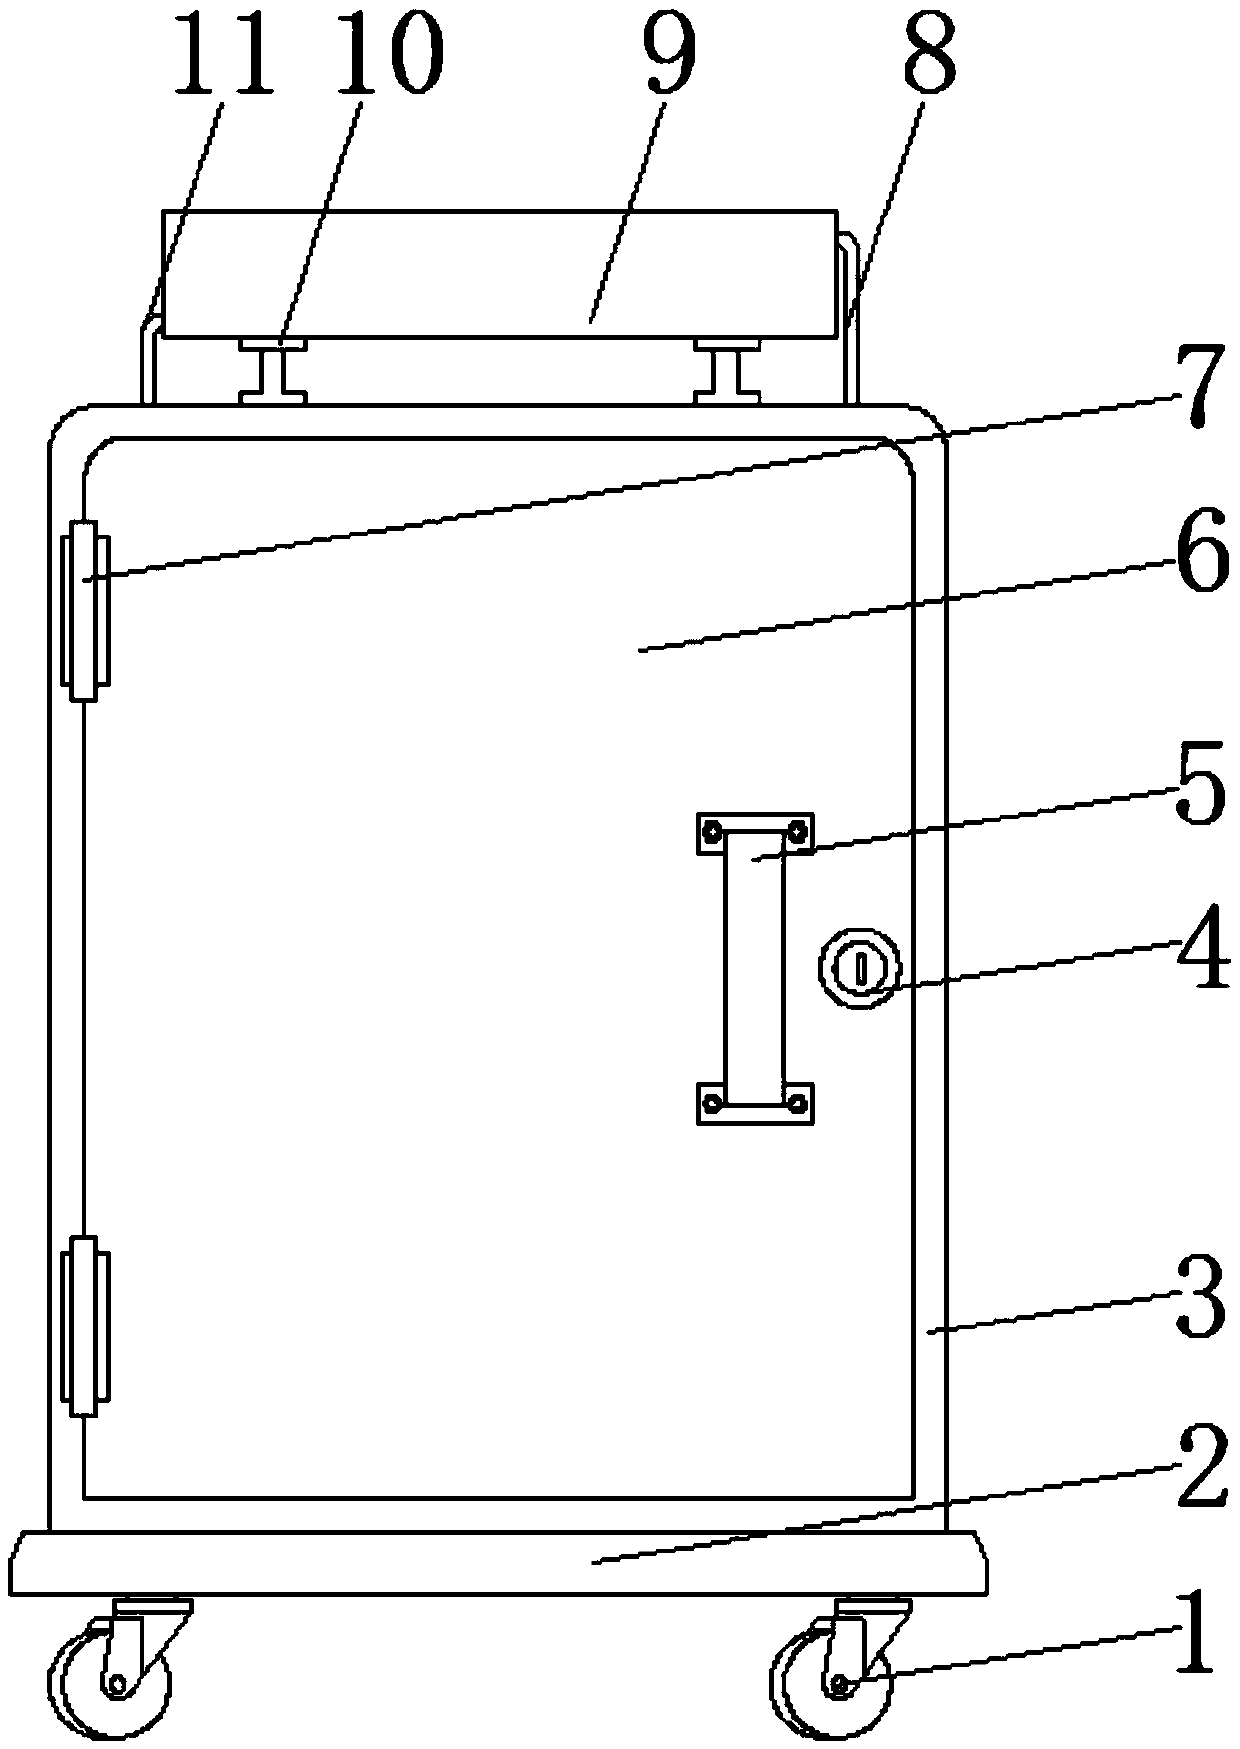 Ointment-like medicine storage device for surgical nursing